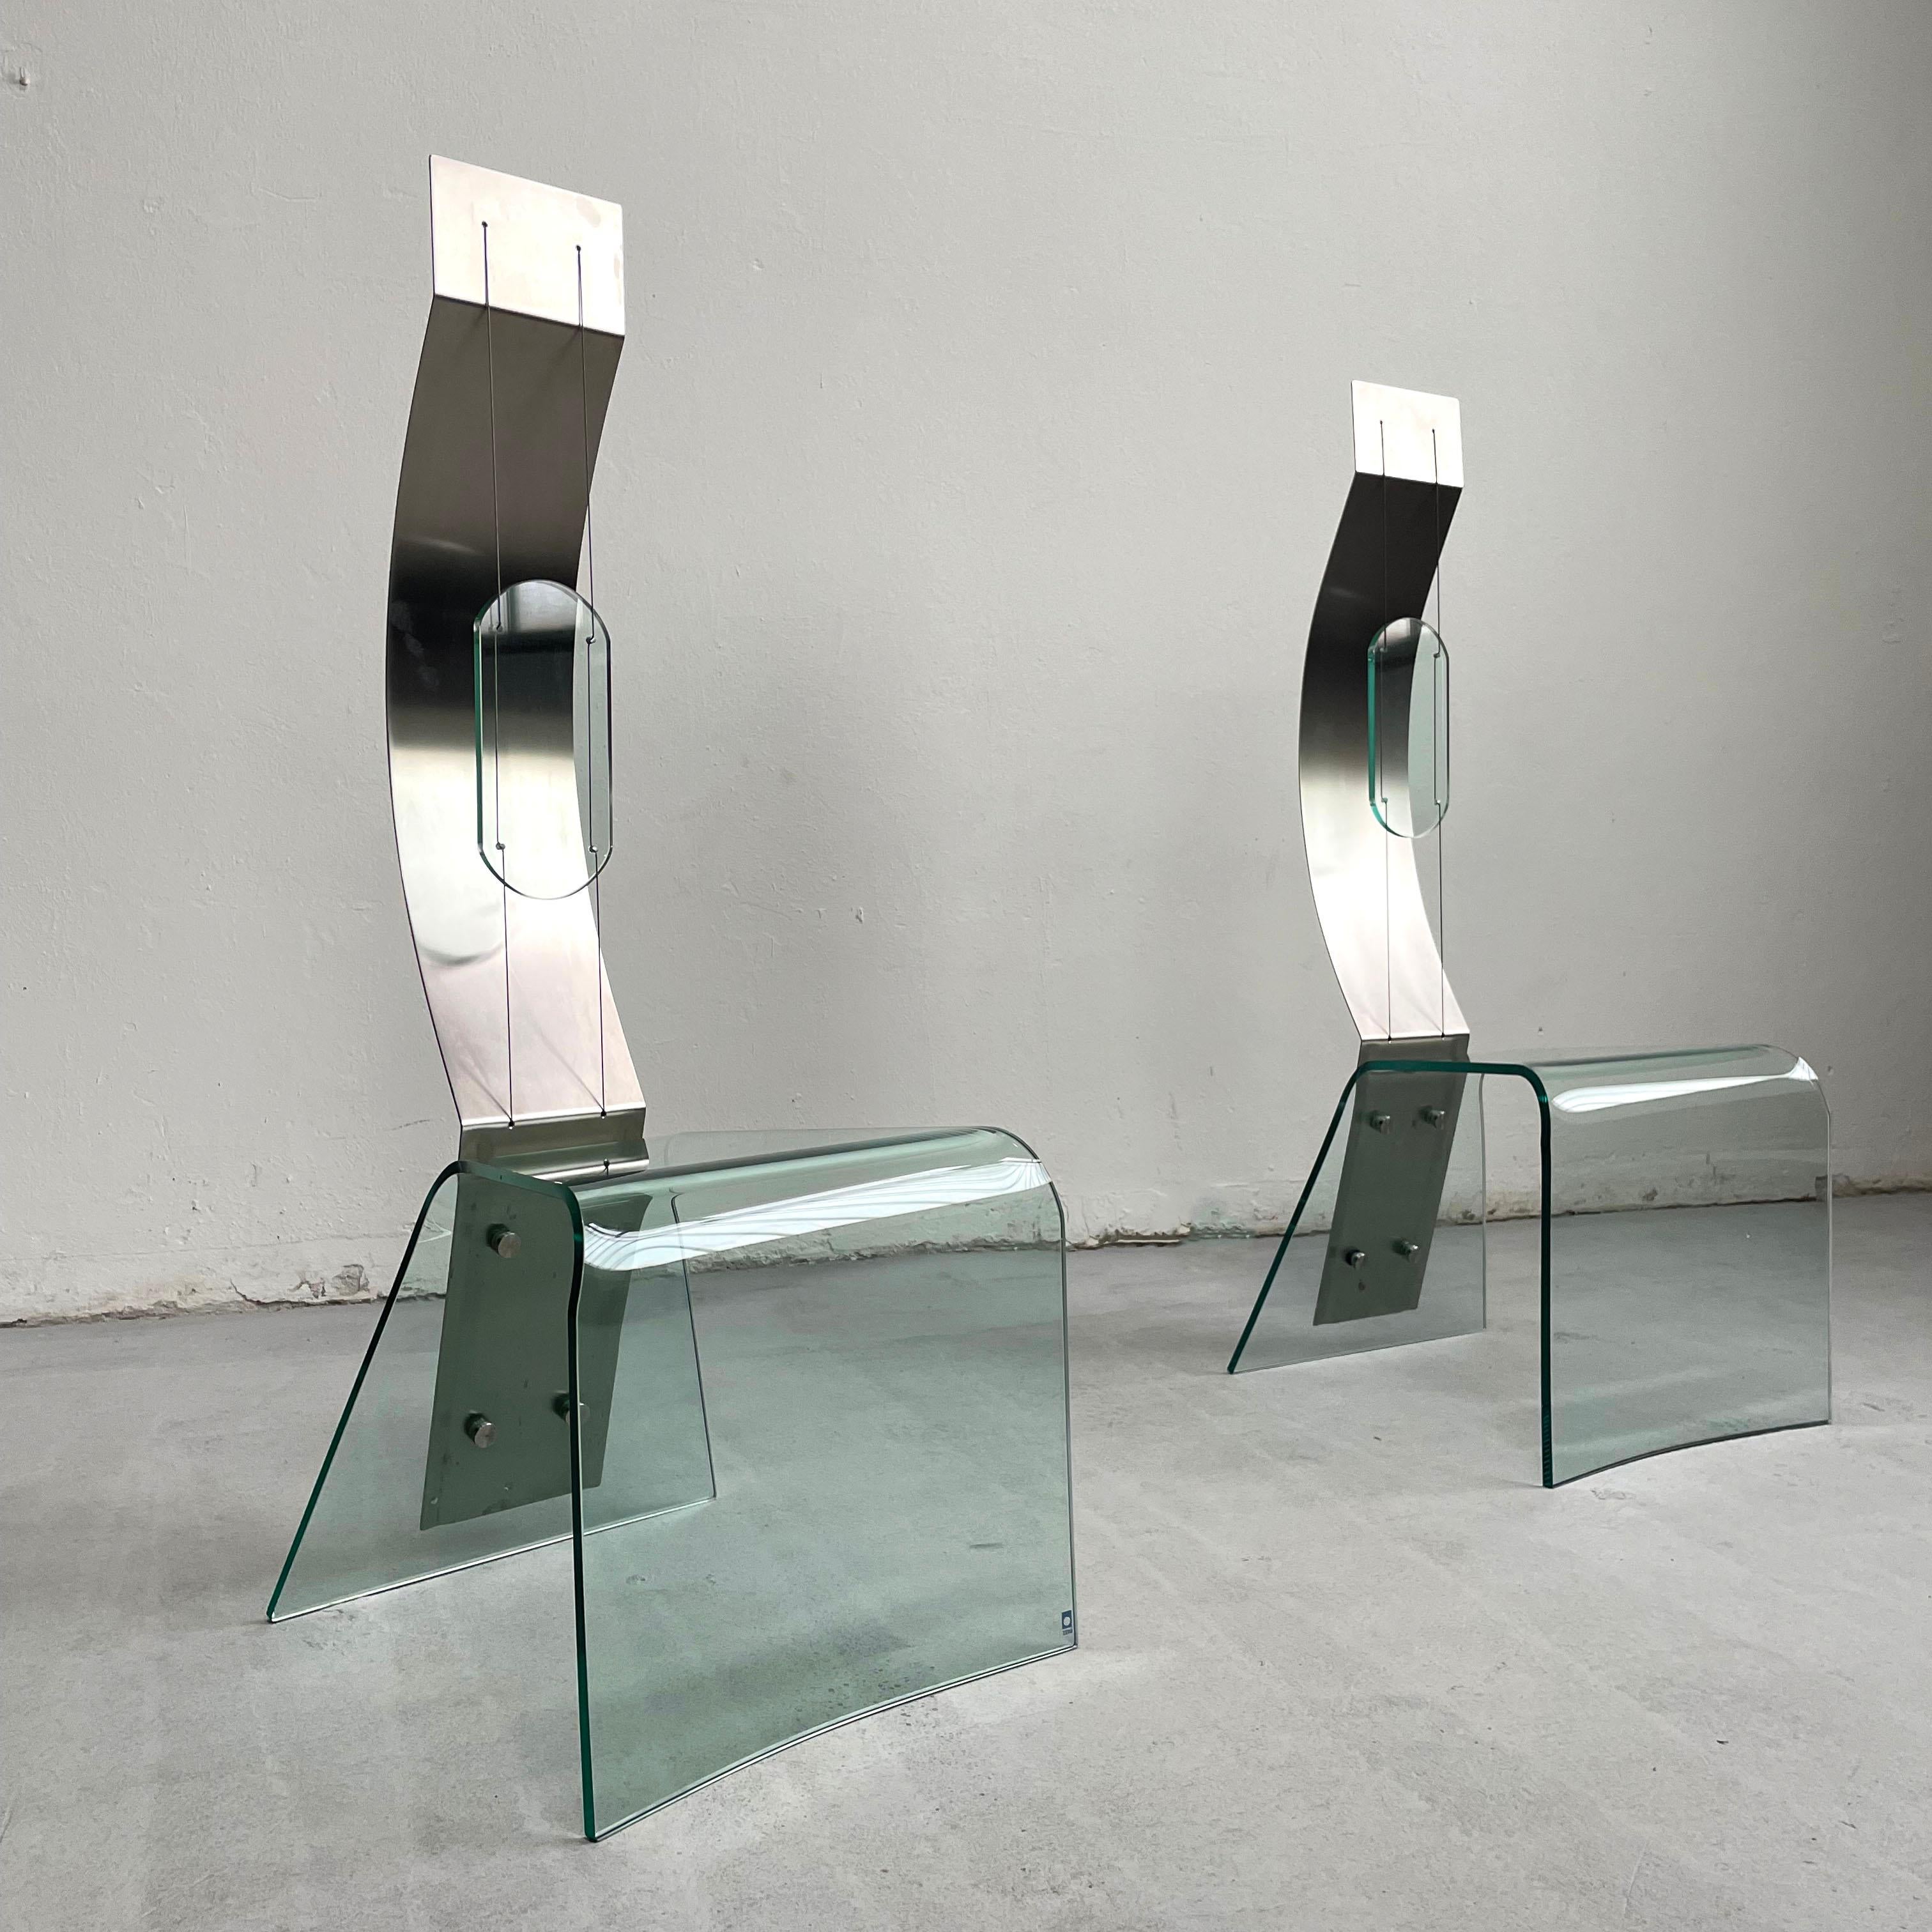 Stunning pair of architectural shaped chairs made of glass and steel from the late 20th century (circa 1980s-1990s)
Unique design reminiscent of the Japanese contemporary design of the 1980s

One chair has a small stamp, labeled 'Zero'.



